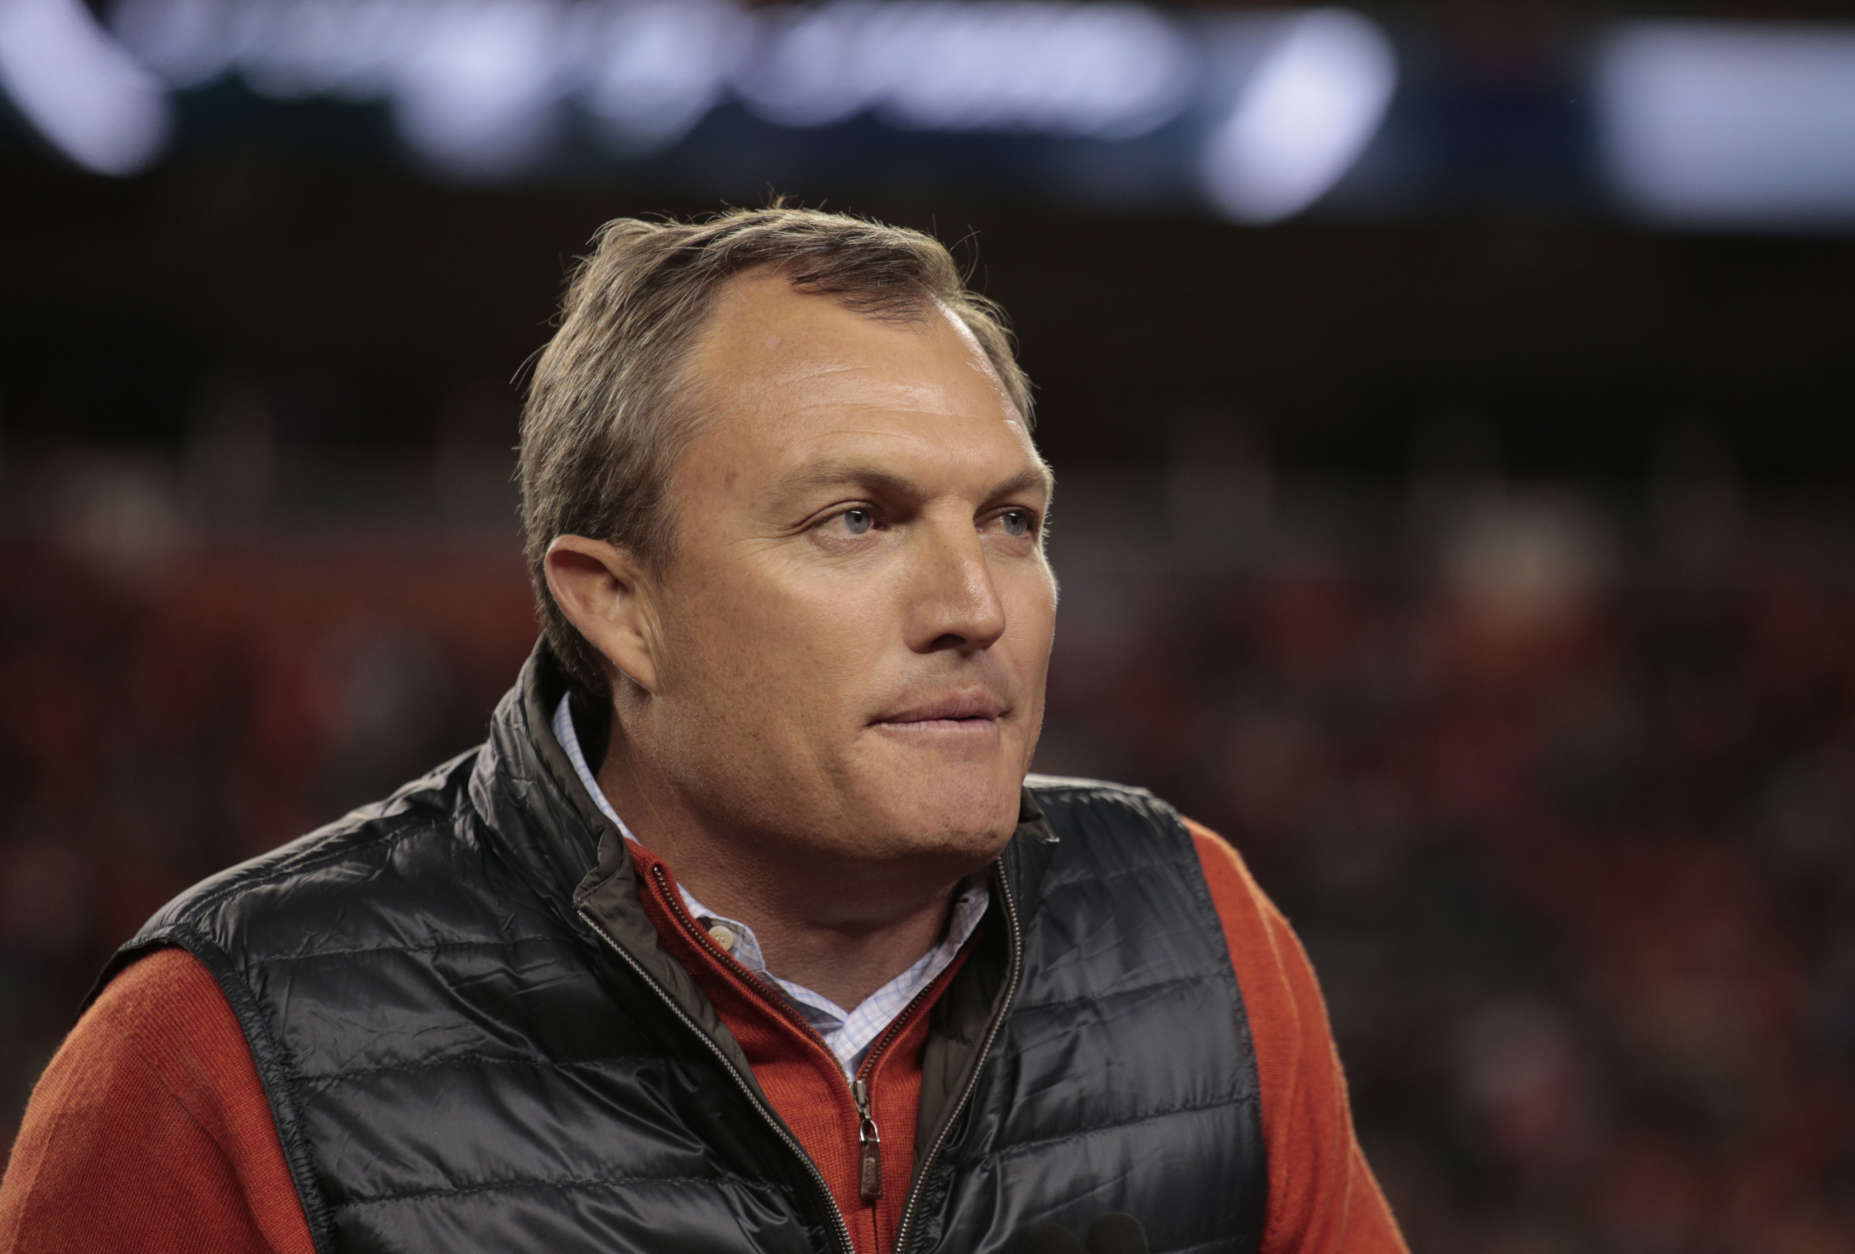 Former Denver Broncos' John Lynch speaks after being inducted into the Broncos ring of honor at half time of an NFL football game against the Houston Texans, Monday, Oct. 24, 2016, in Denver. (AP Photo/Joe Mahoney)